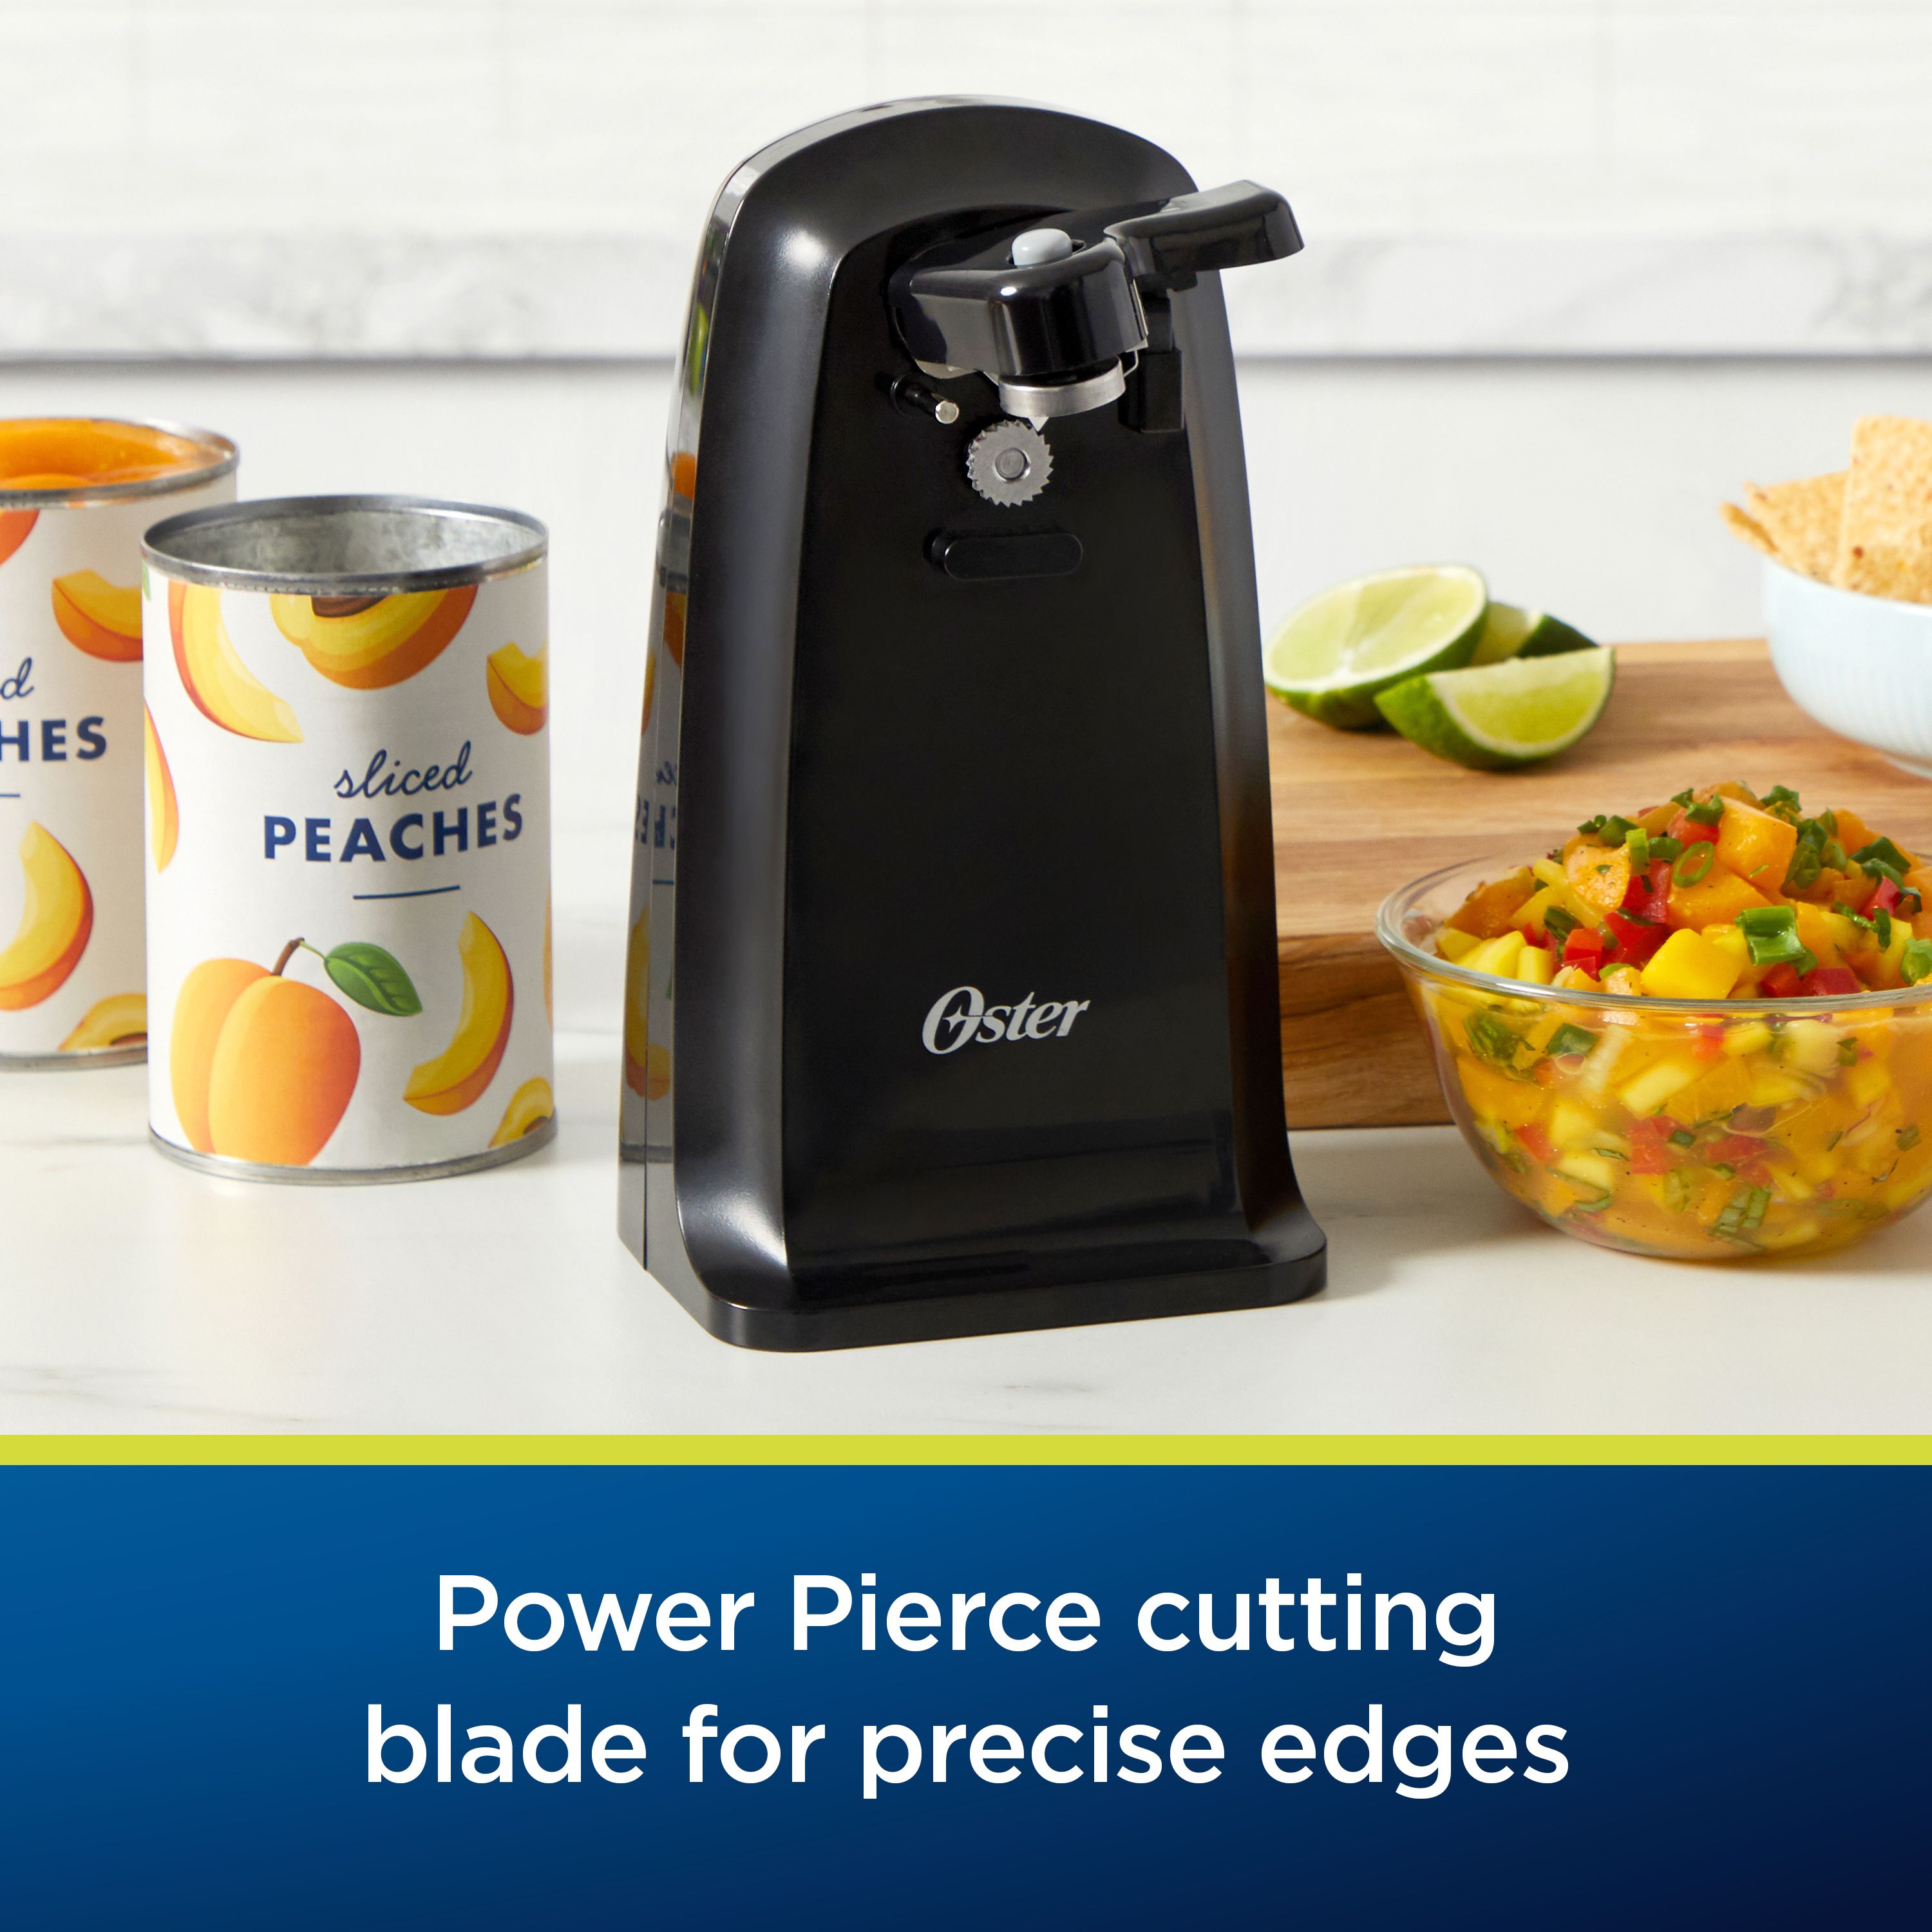 Oster Electric Can Opener with Power Pierce Cutting Blade for Precise Edges, Black - image 3 of 7